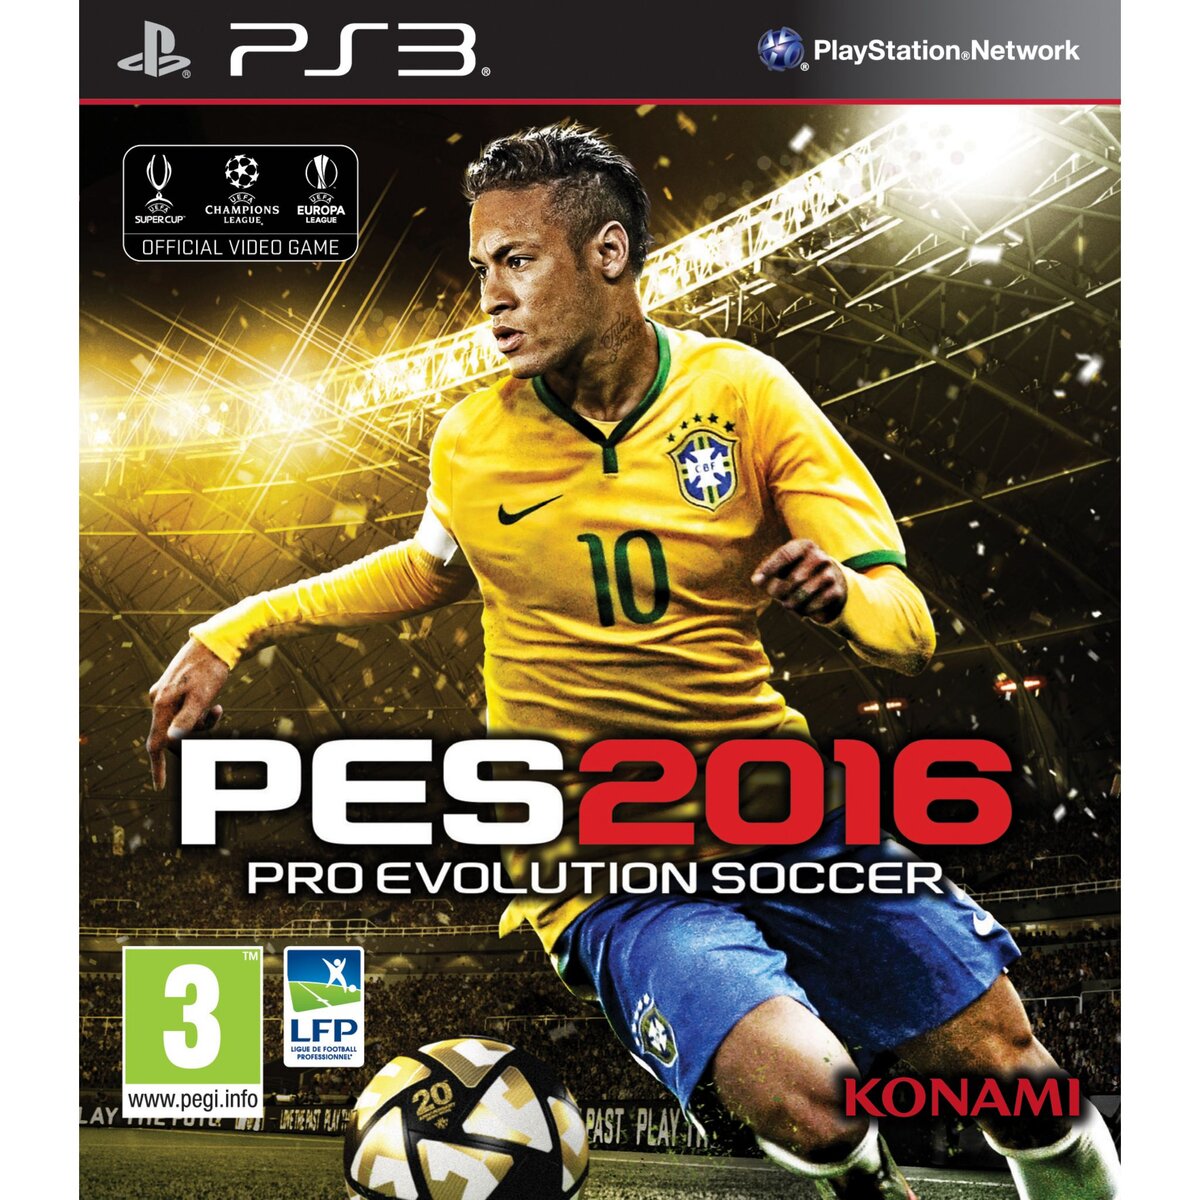 PES 2016 PS3 - Edition Day One - Pro Evolution Soccer